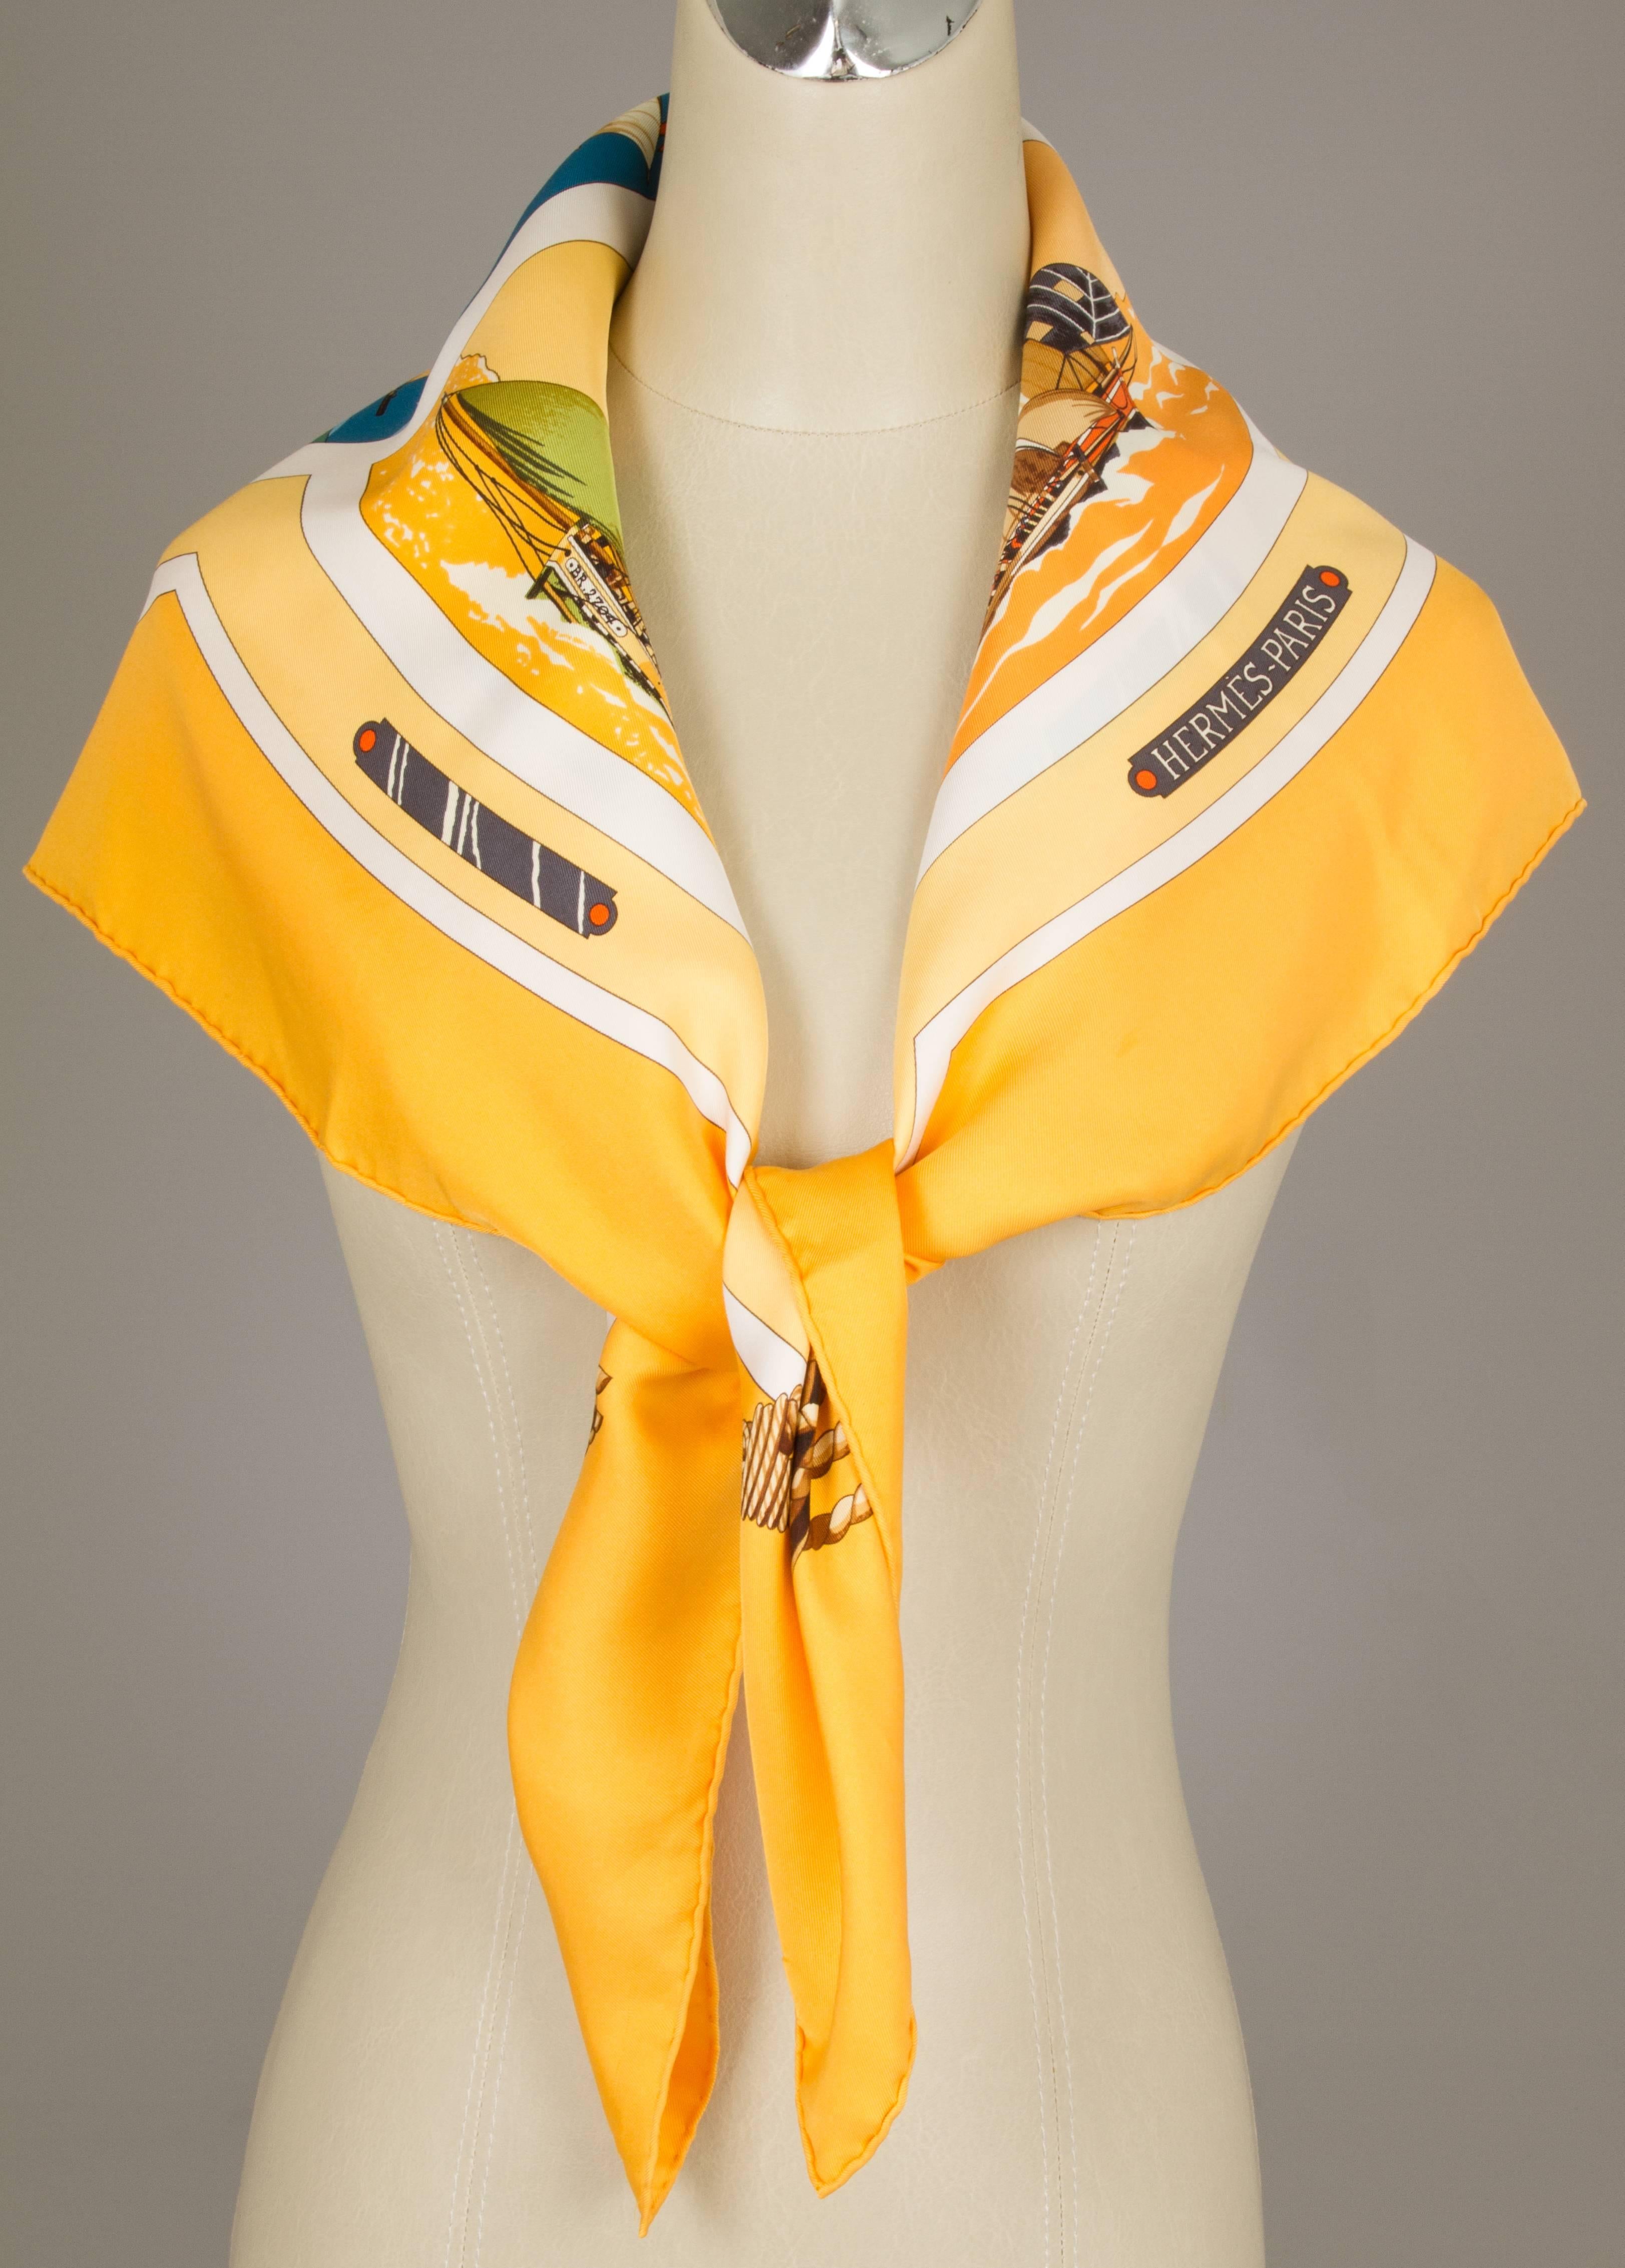 Designed by Loic Dubigeon, this scarf has a nuatical theme with imagery of various schooners.